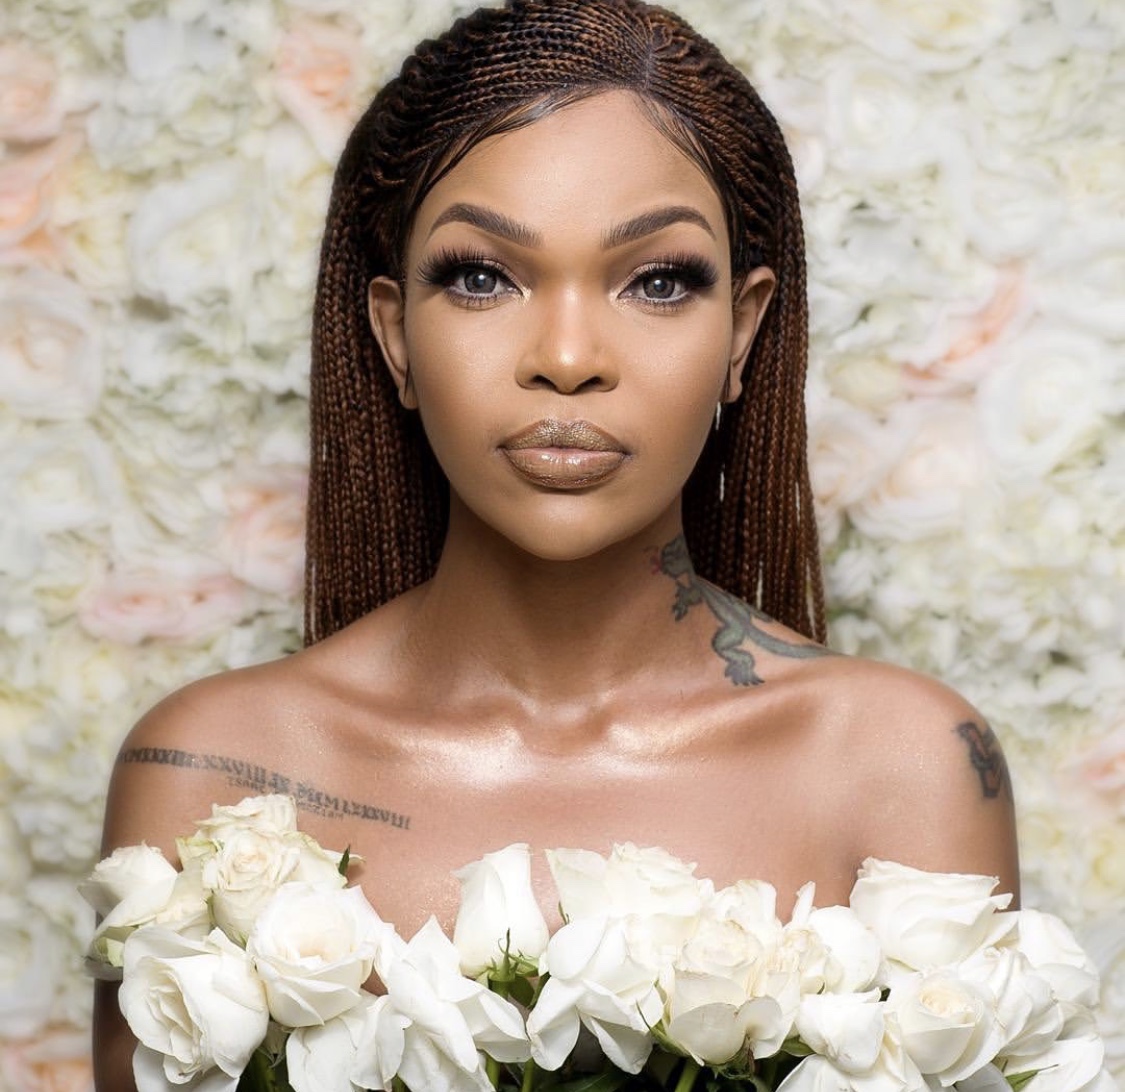 Savage! Wema Sepetu responds to an Instagram troll who called her ‘Old’ after her unfiltered photo surfaced online